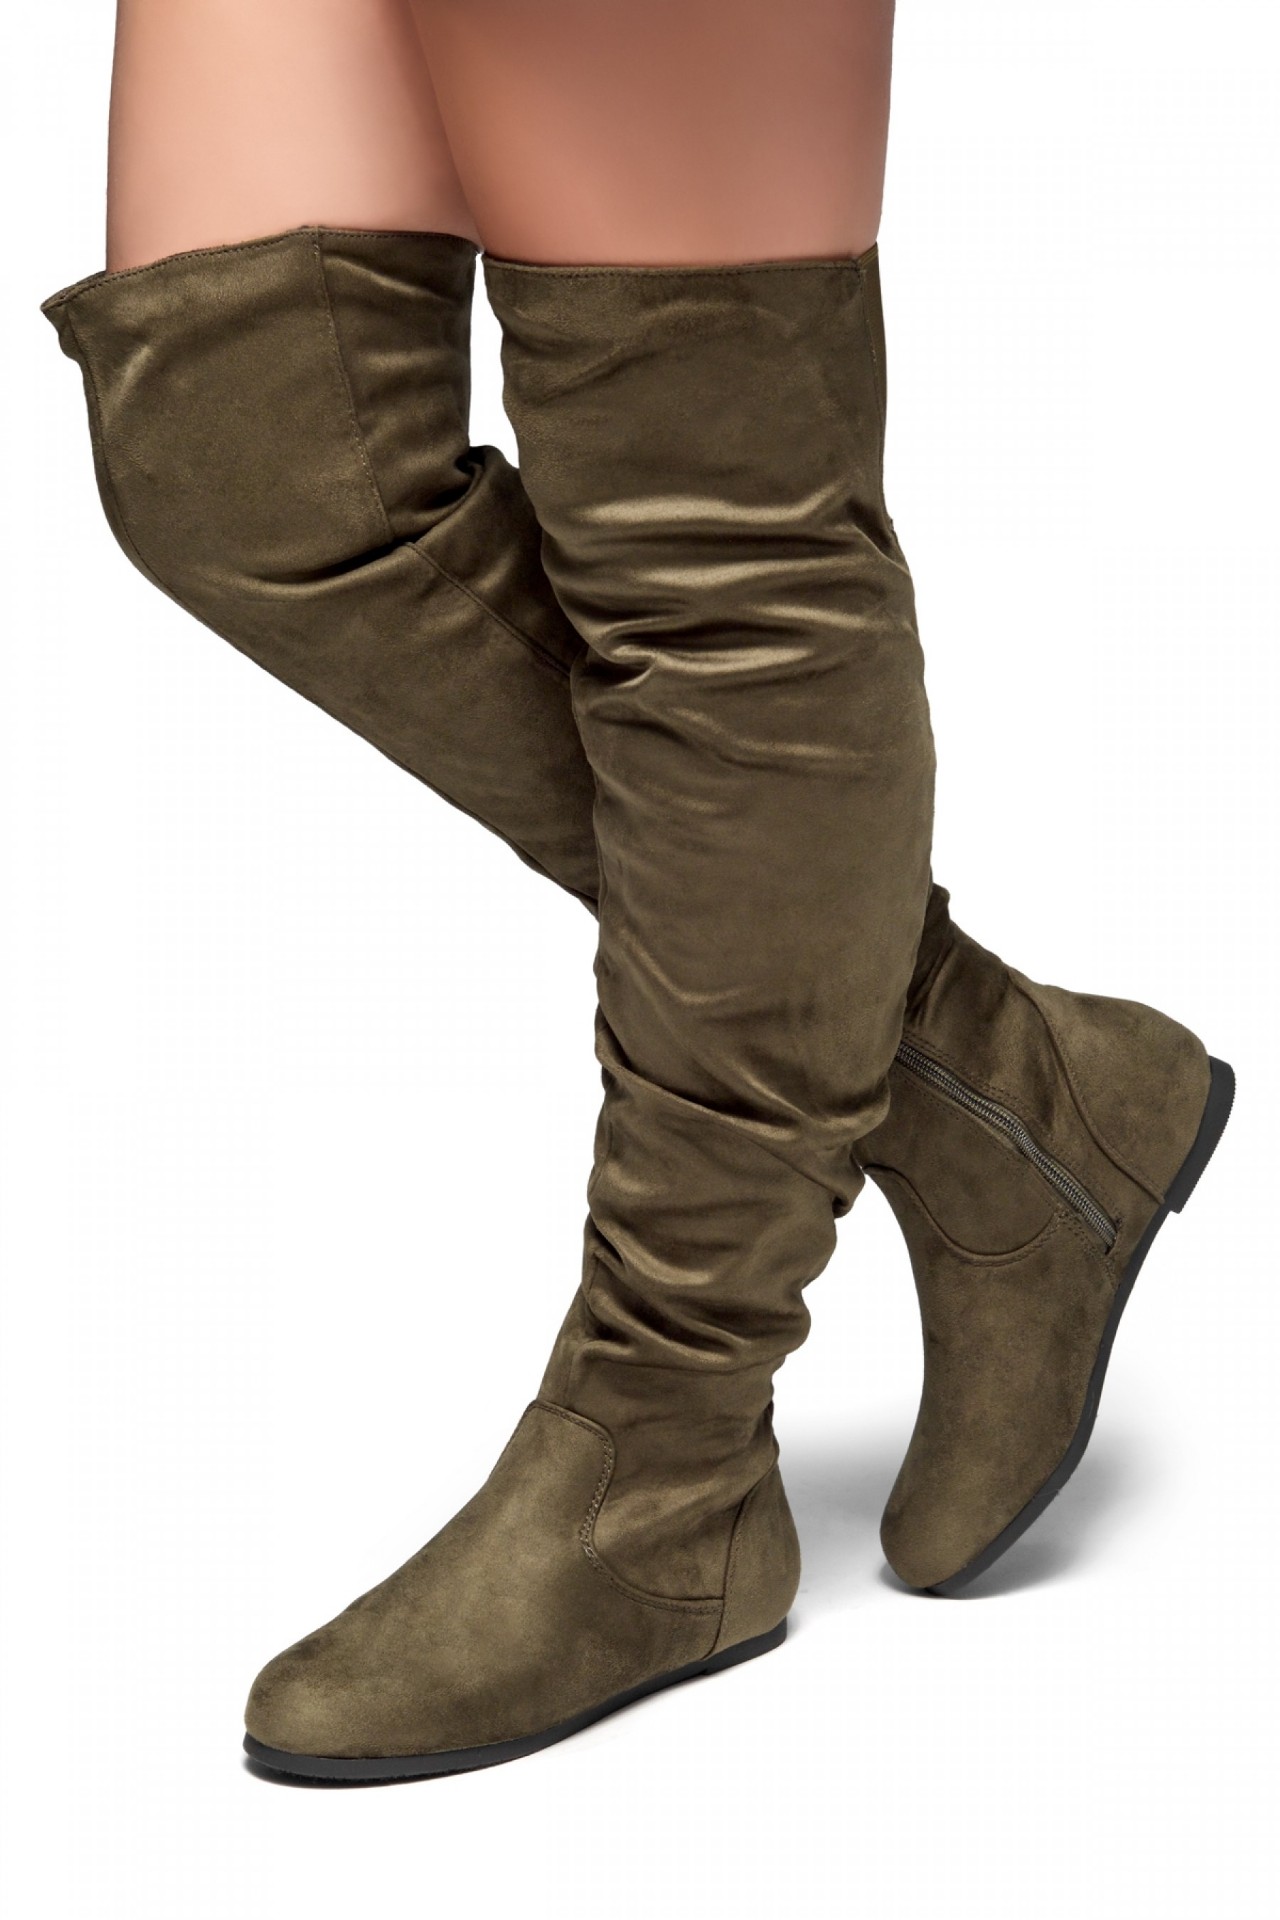 Odessa Women's Fashion-Hi Over-the-Knee Thigh High Flat Slouchy Shaft Low Heel Boots Olive